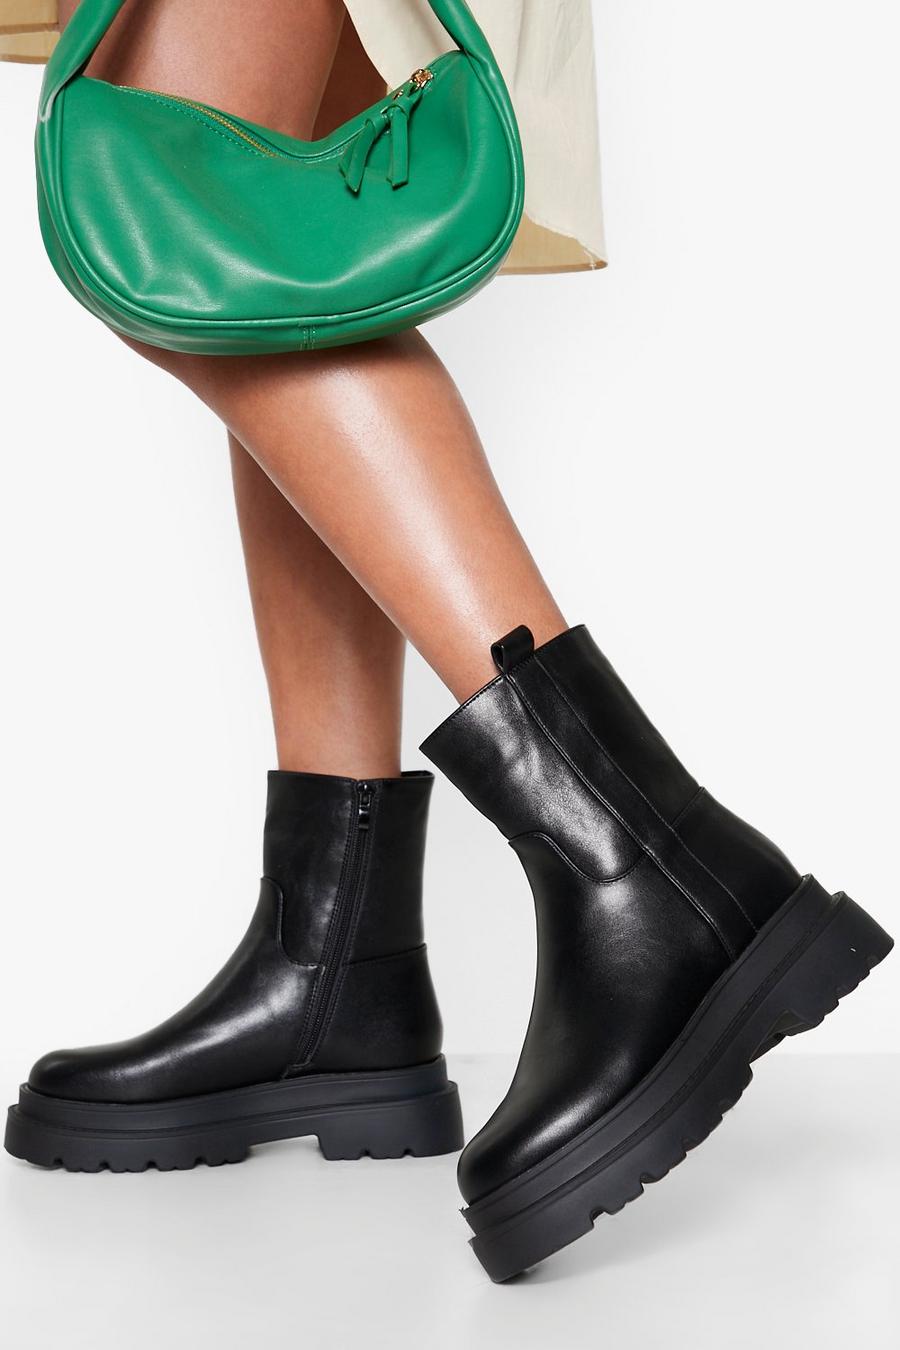 Black Chunky Pull On Boots